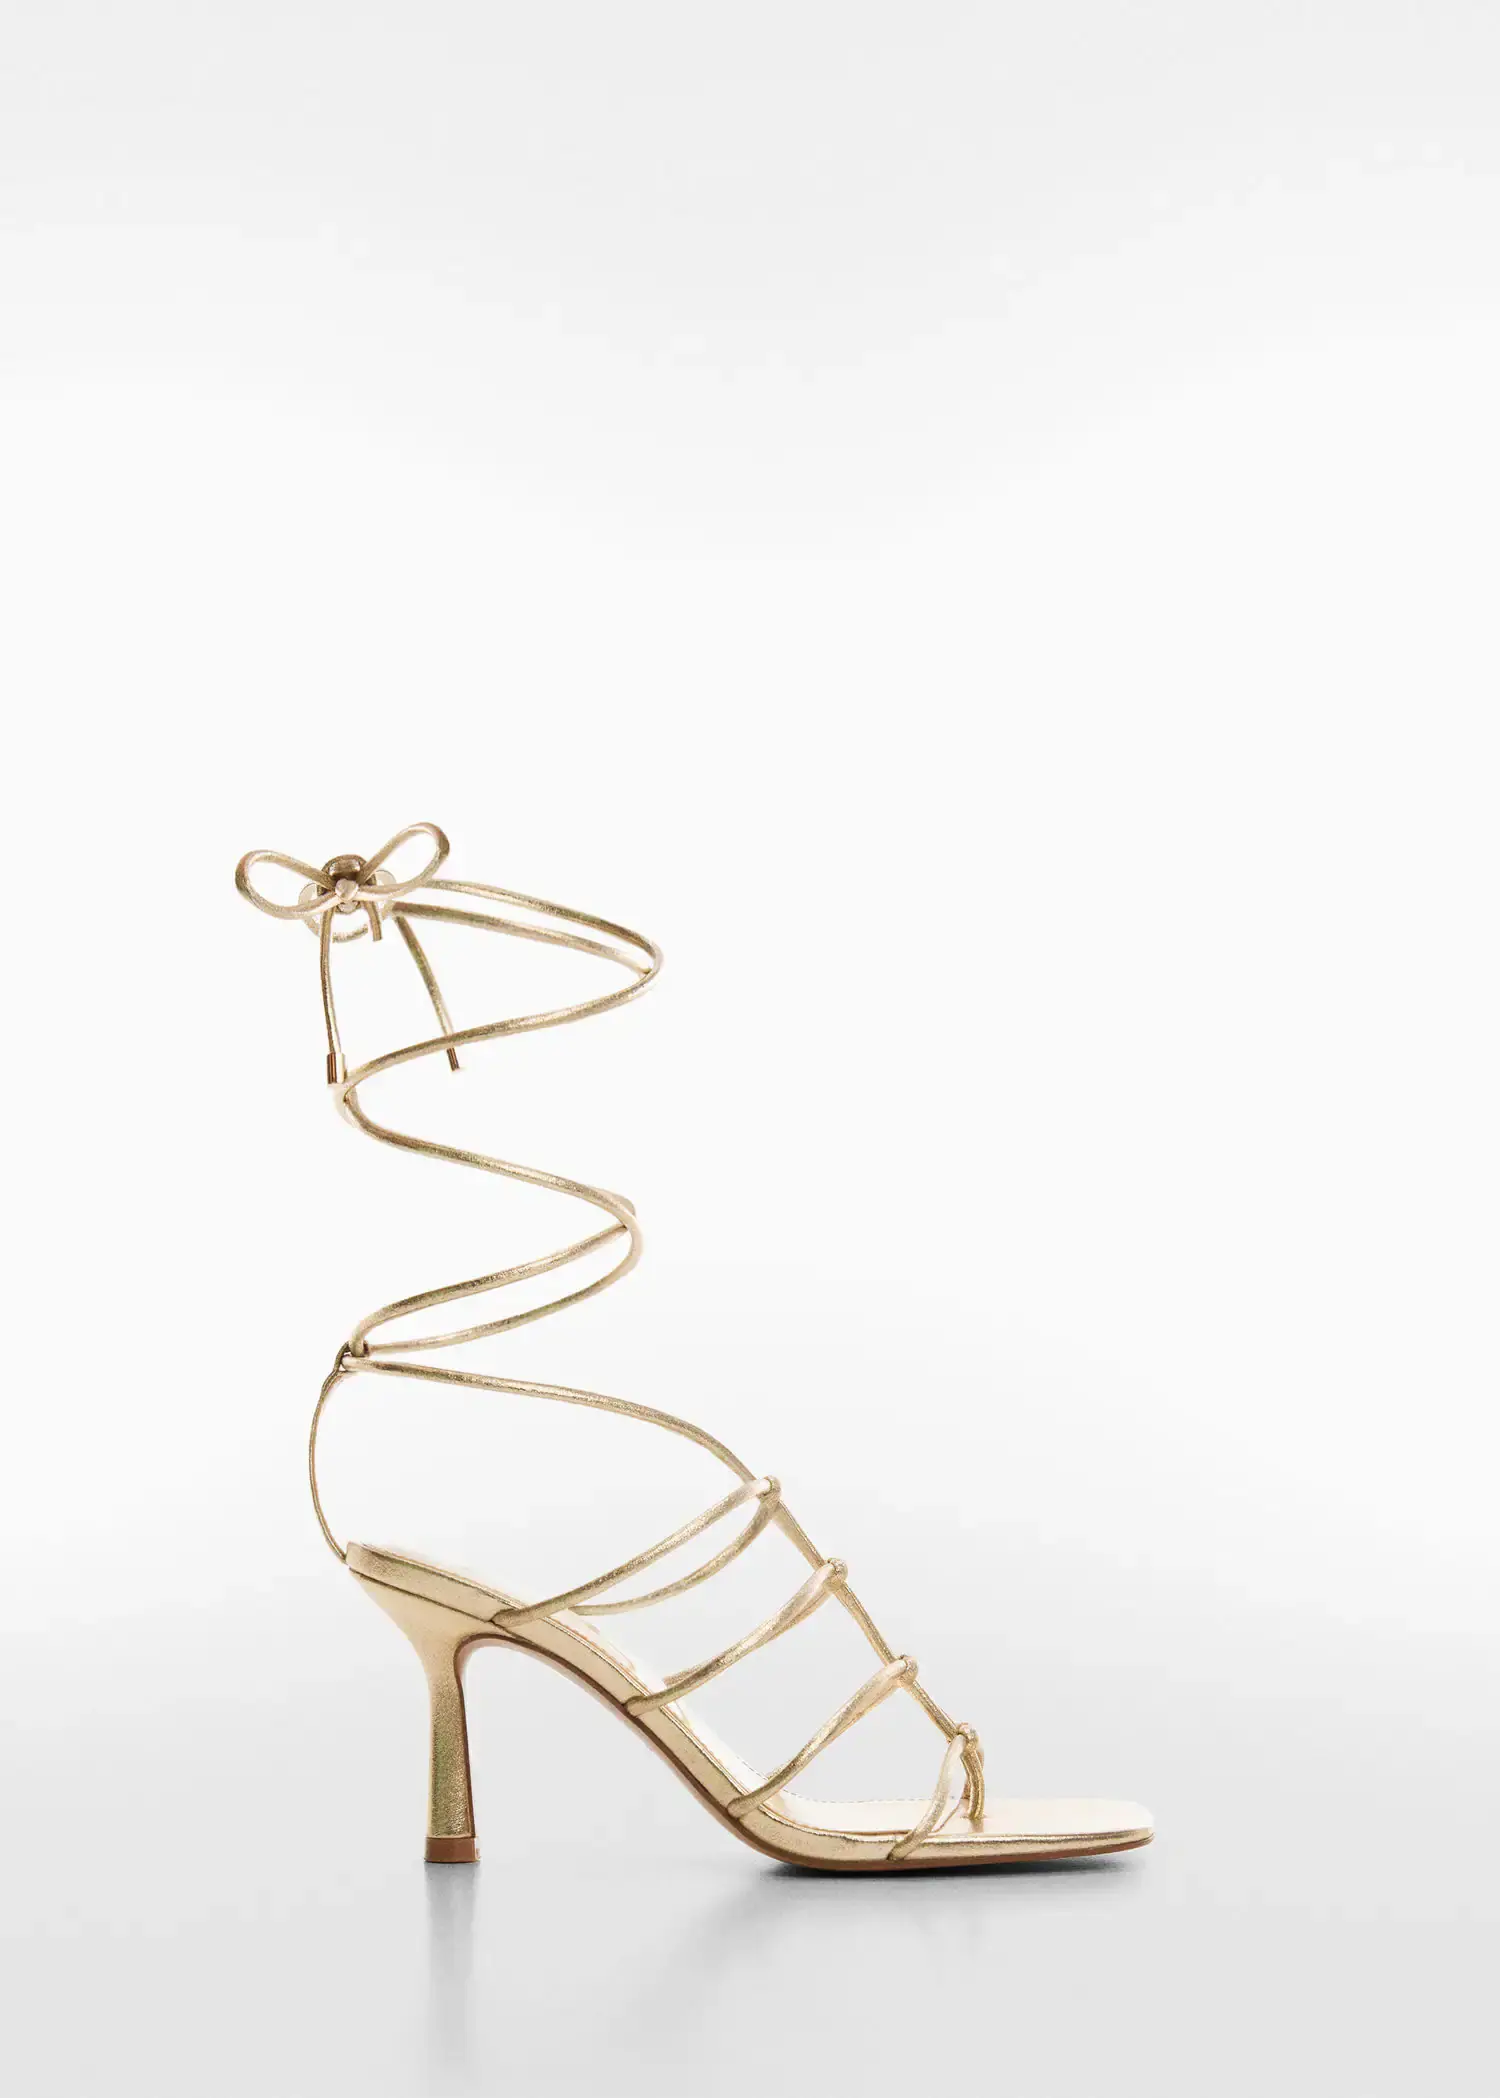 Mango Metallic strappy heeled sandal. a gold strappy high heeled sandal with a bow. 